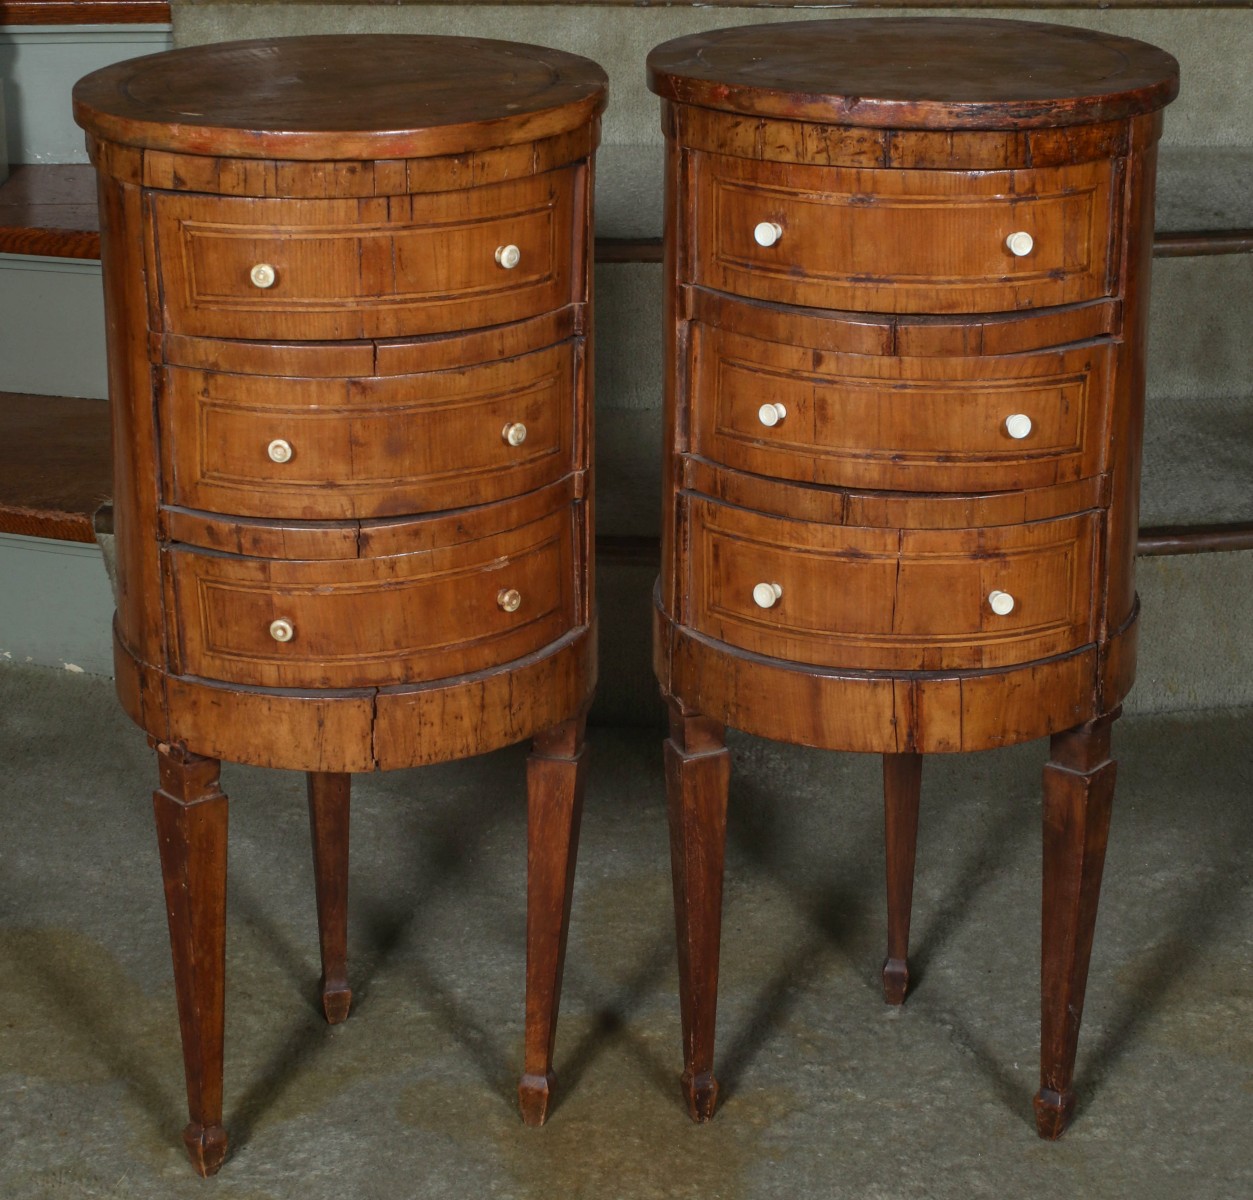 A RARE PAIR OF 18TH CENTURY ITALIAN DRUM FORM COMMODES